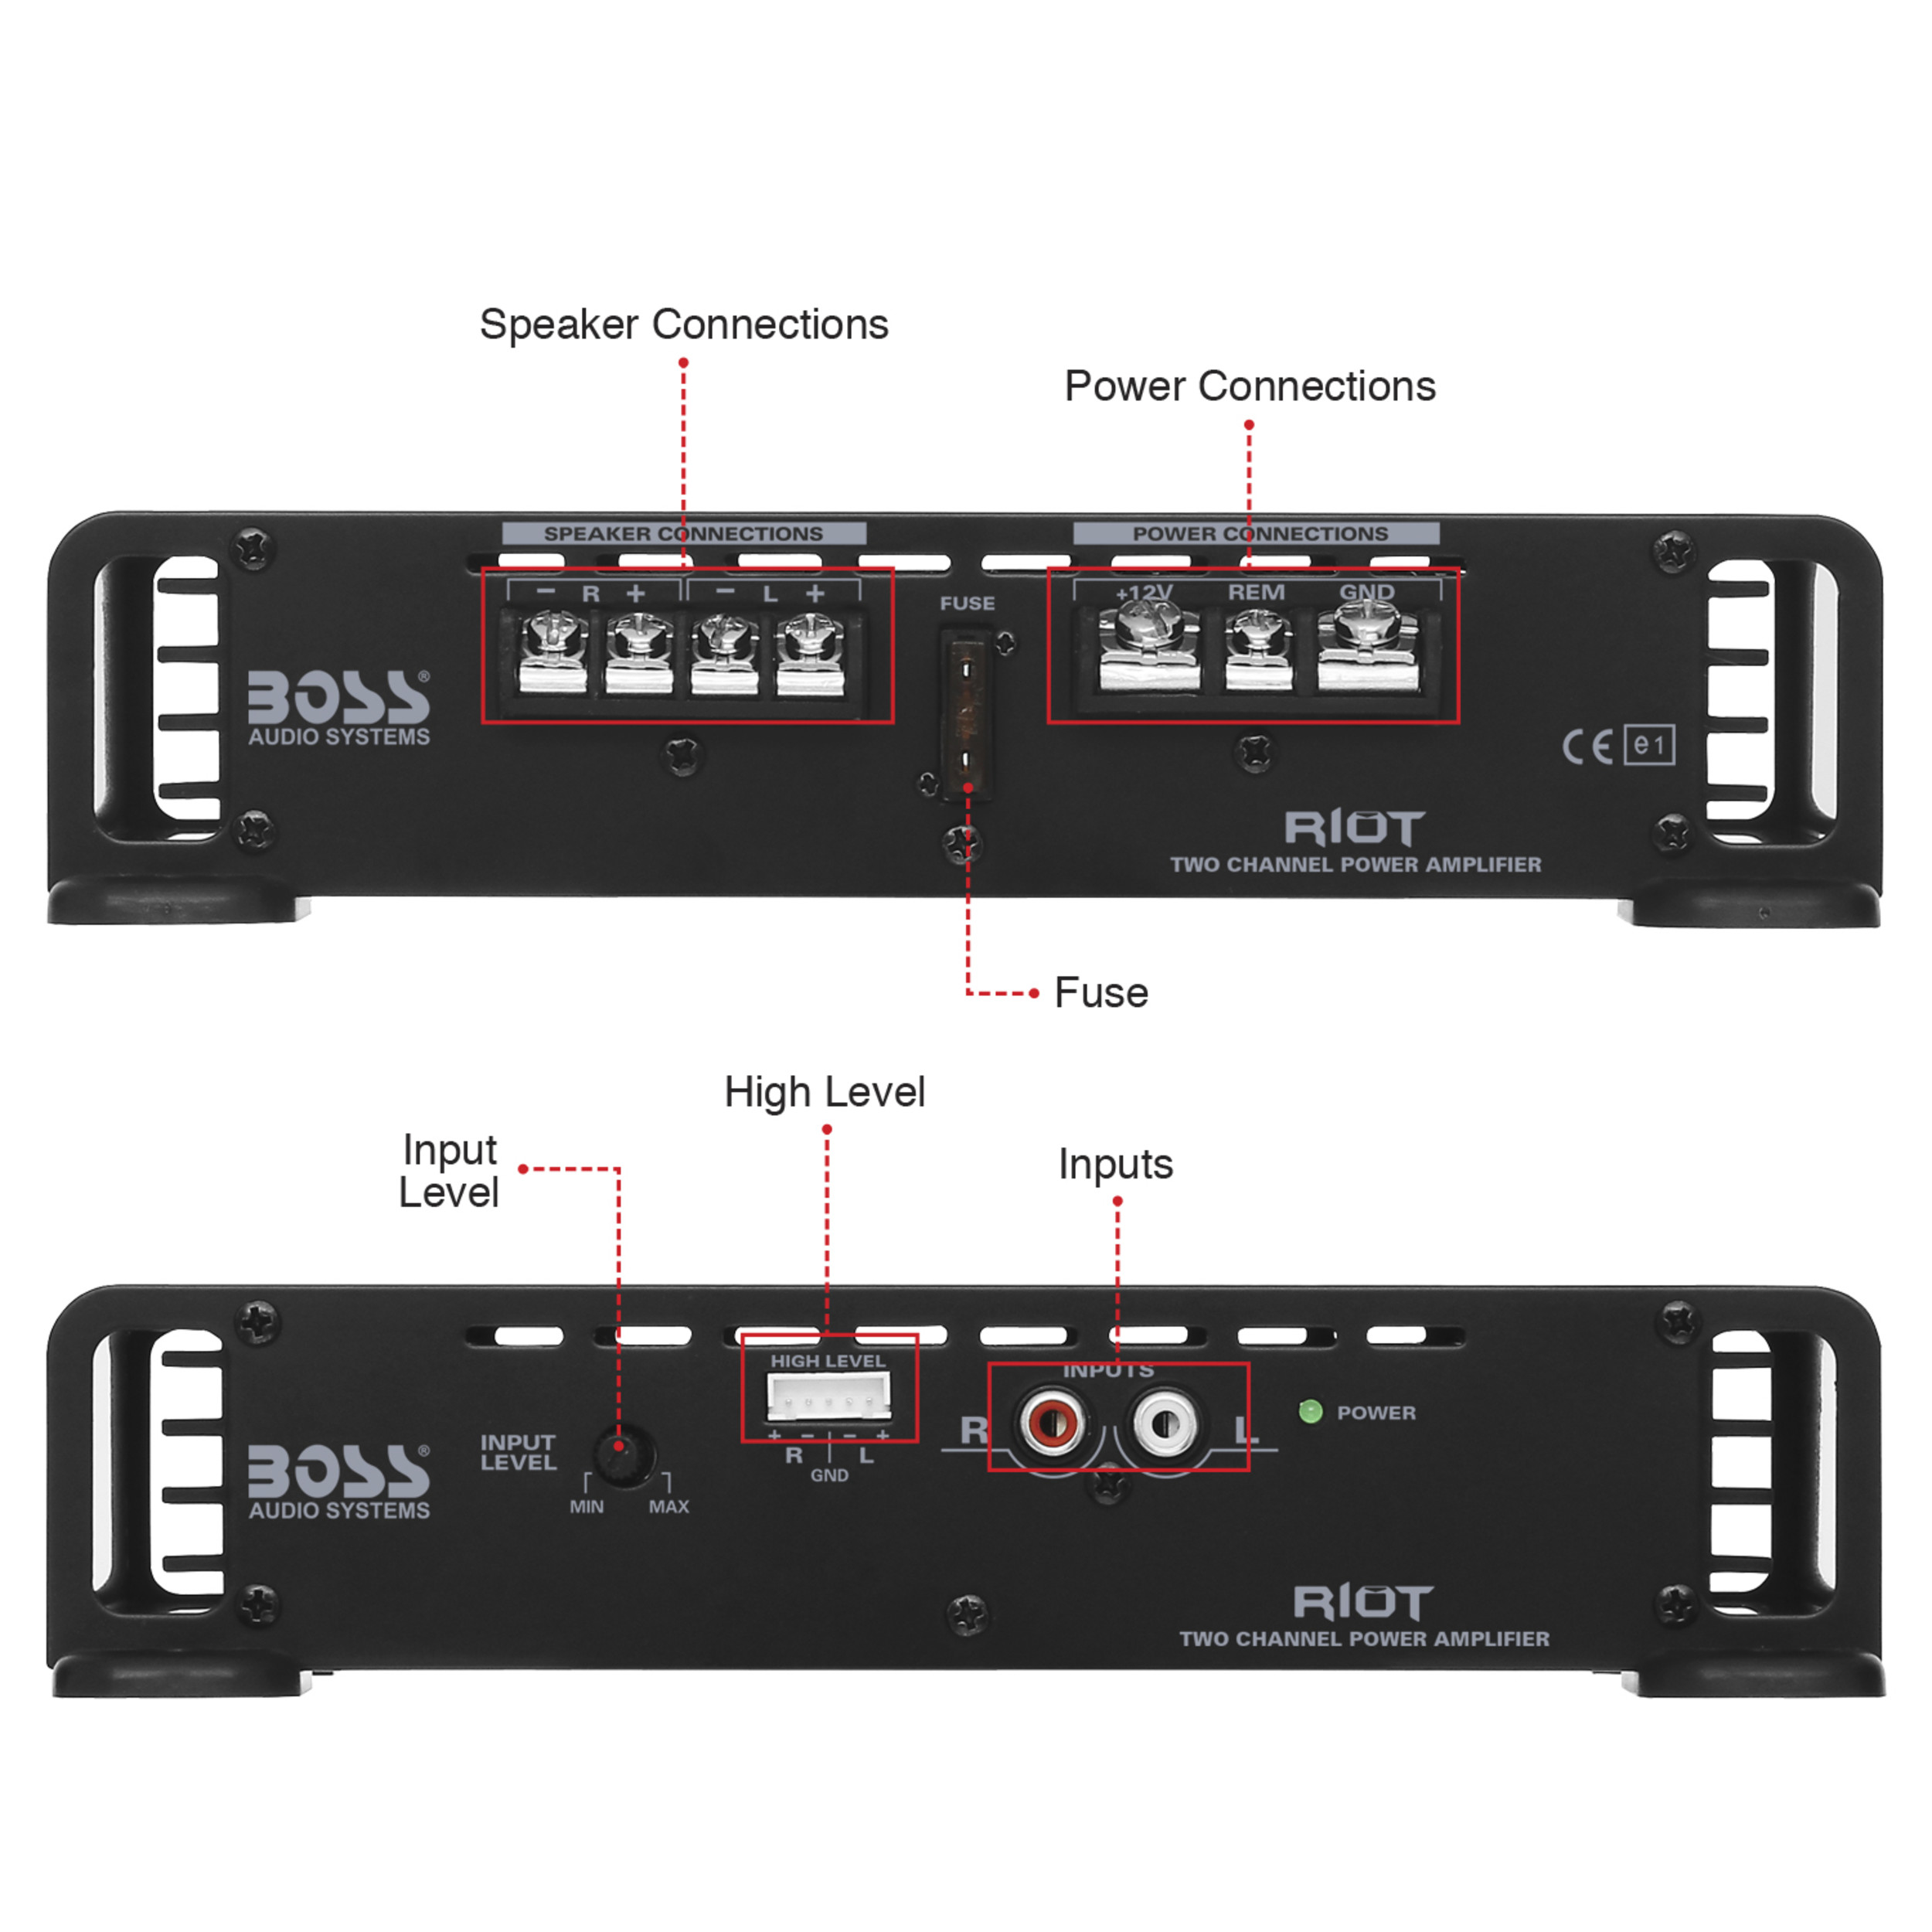 BOSS Audio Systems R1002 Riot Series Car Audio Stereo Amplifier - 200 High Output, 2 Channel, Class A/B, 2/4 Ohm Stable, Low/High Level Inputs, Full Range, Subwoofer - image 5 of 20